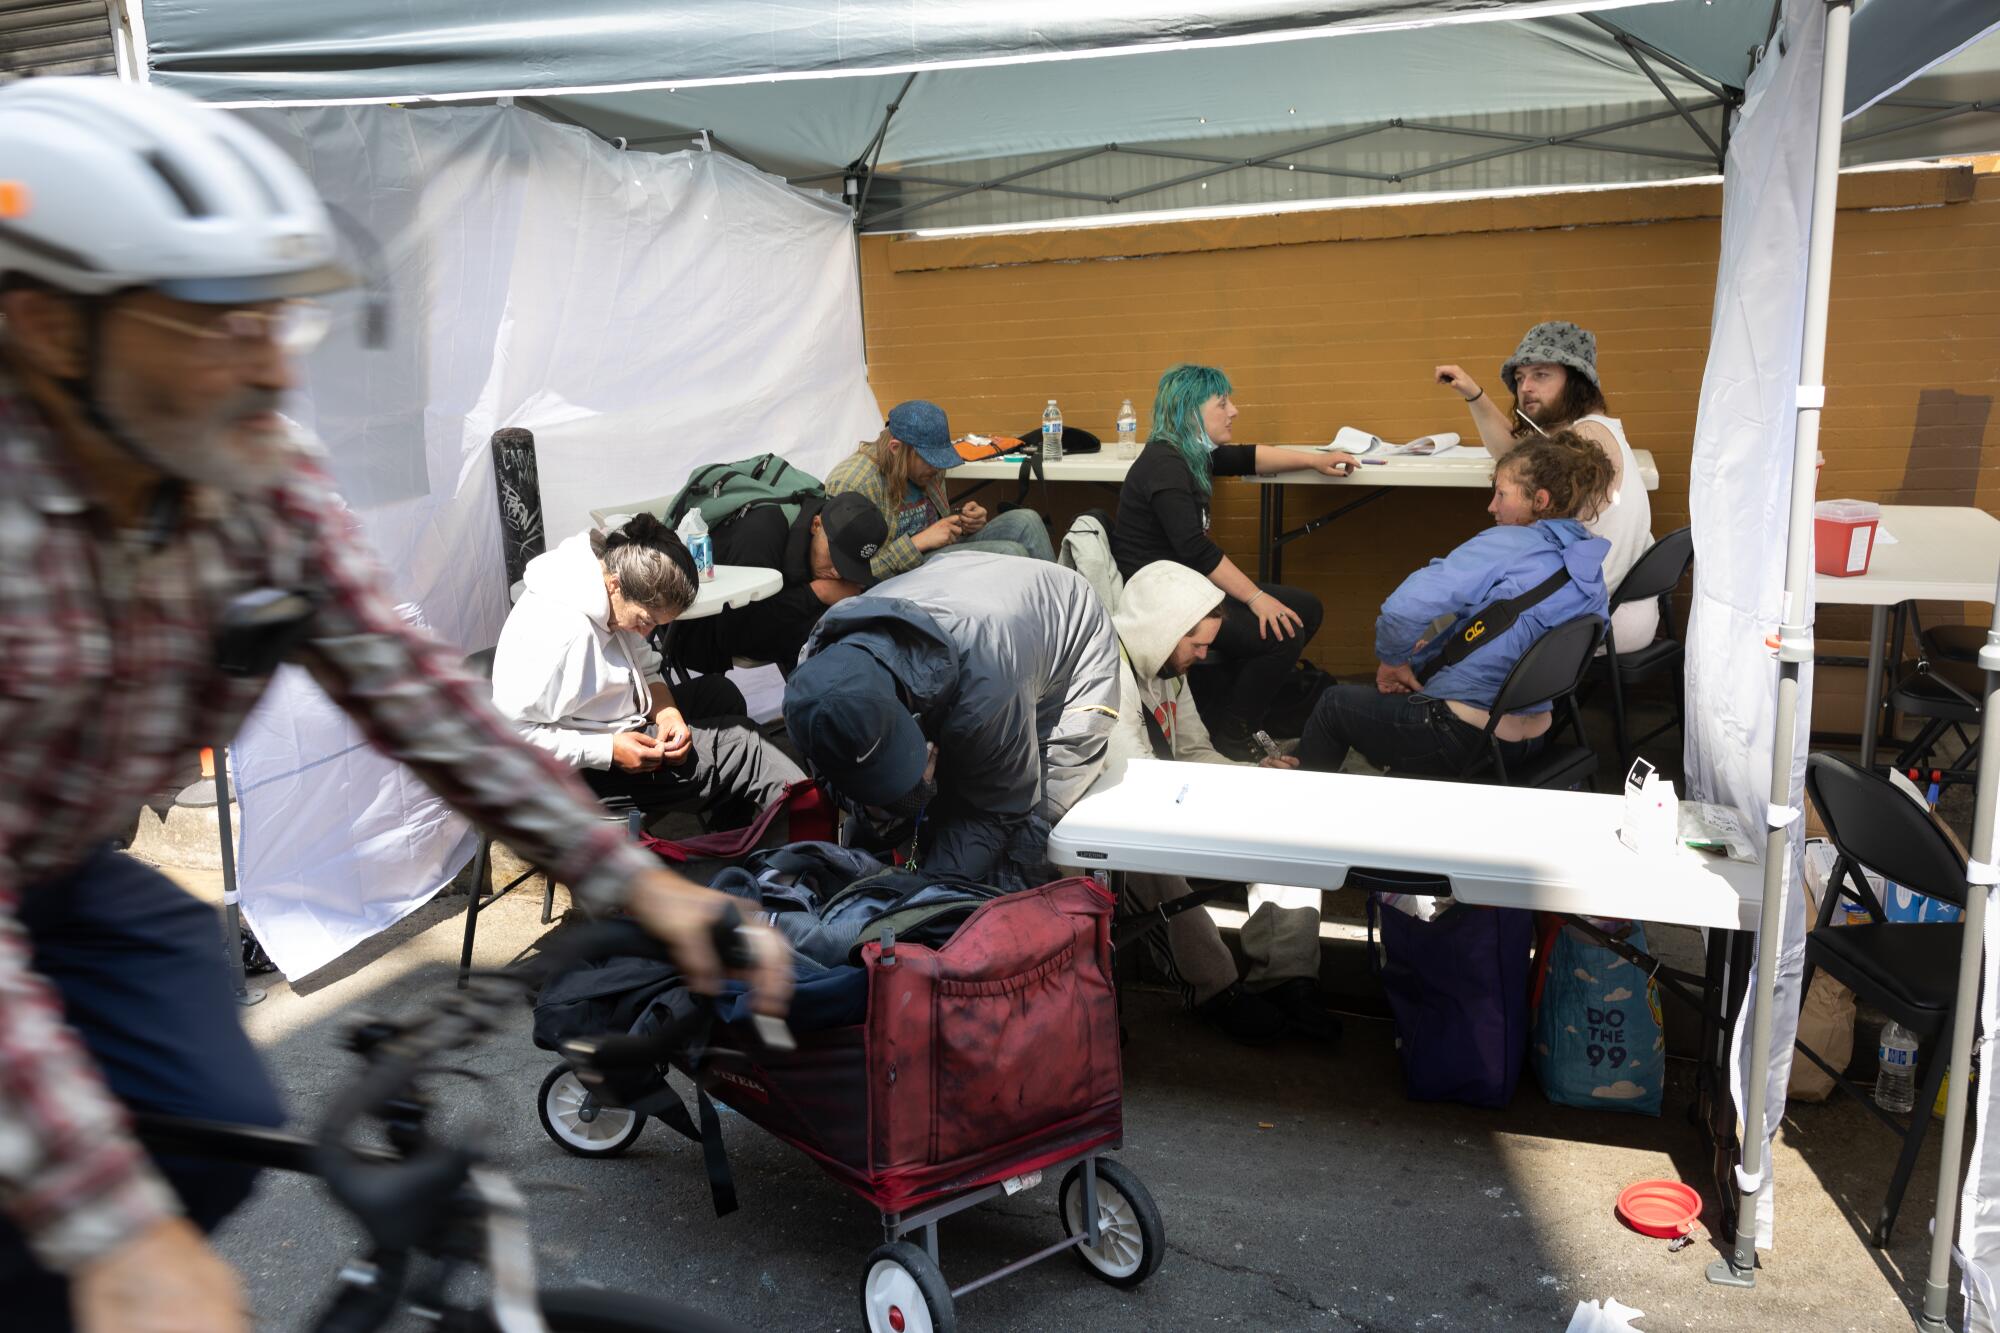 A pop-up site for safe injections in San Francisco.